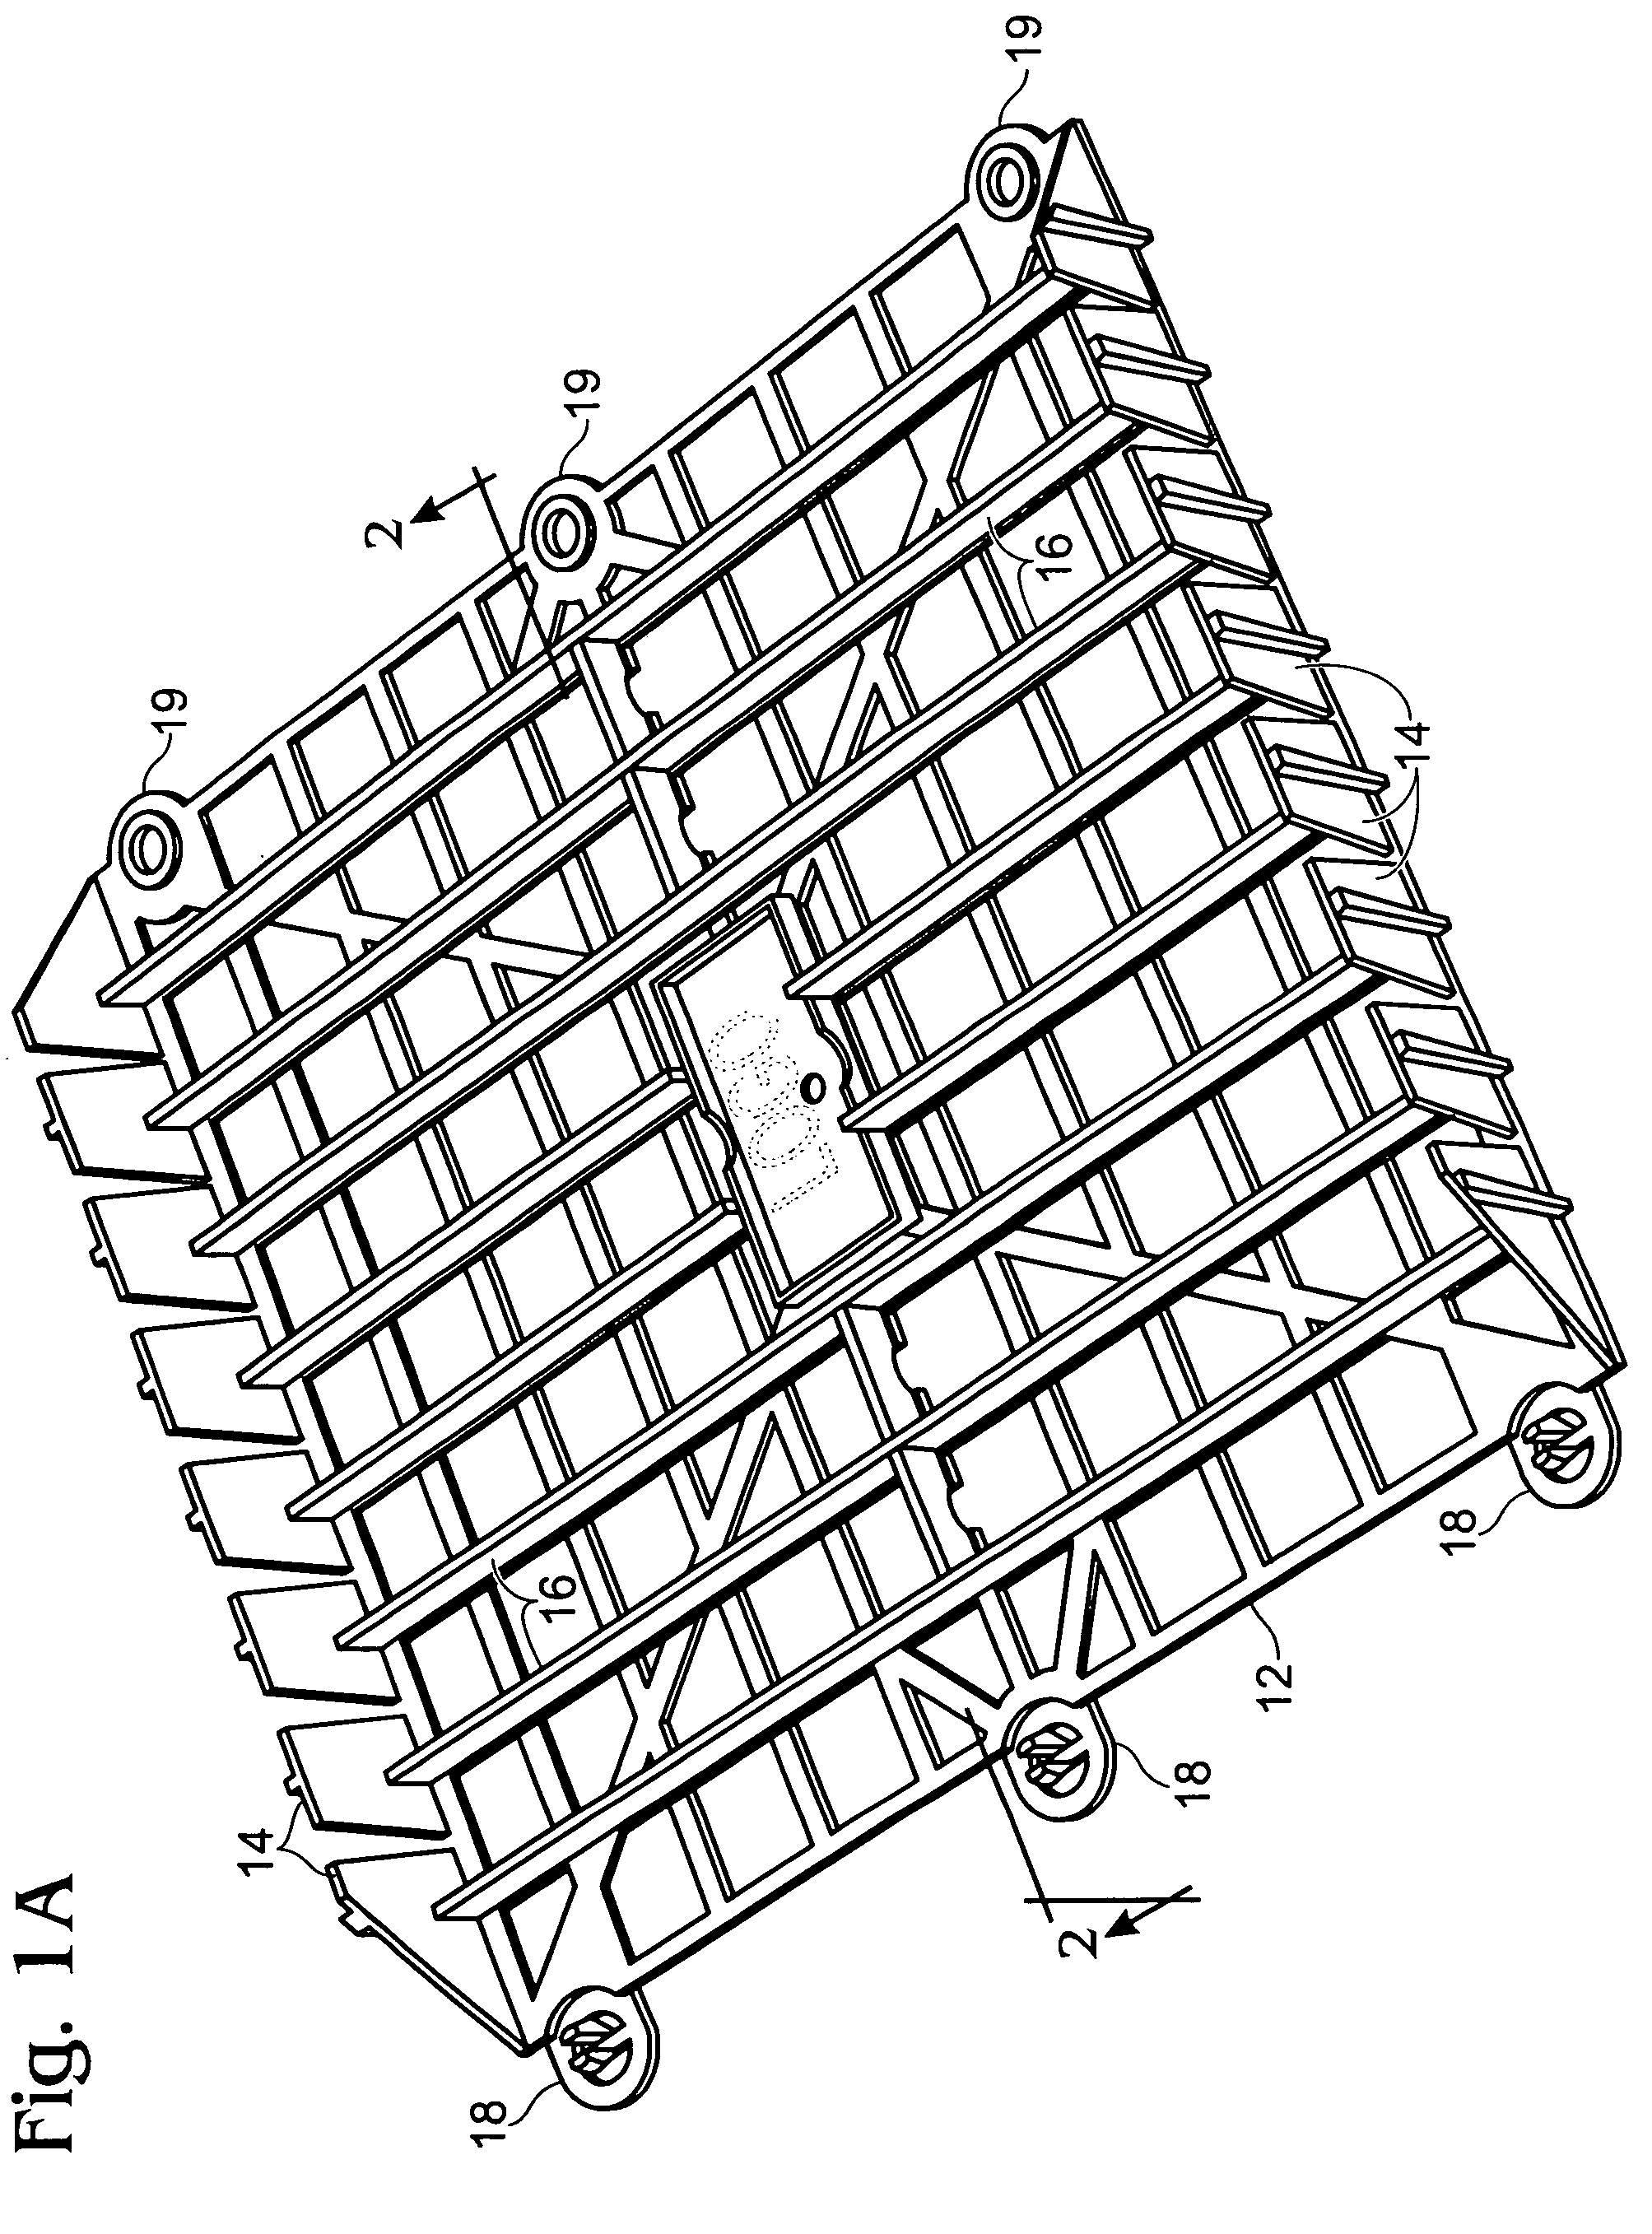 Structure and method for supporting headstones and other stonelike objects